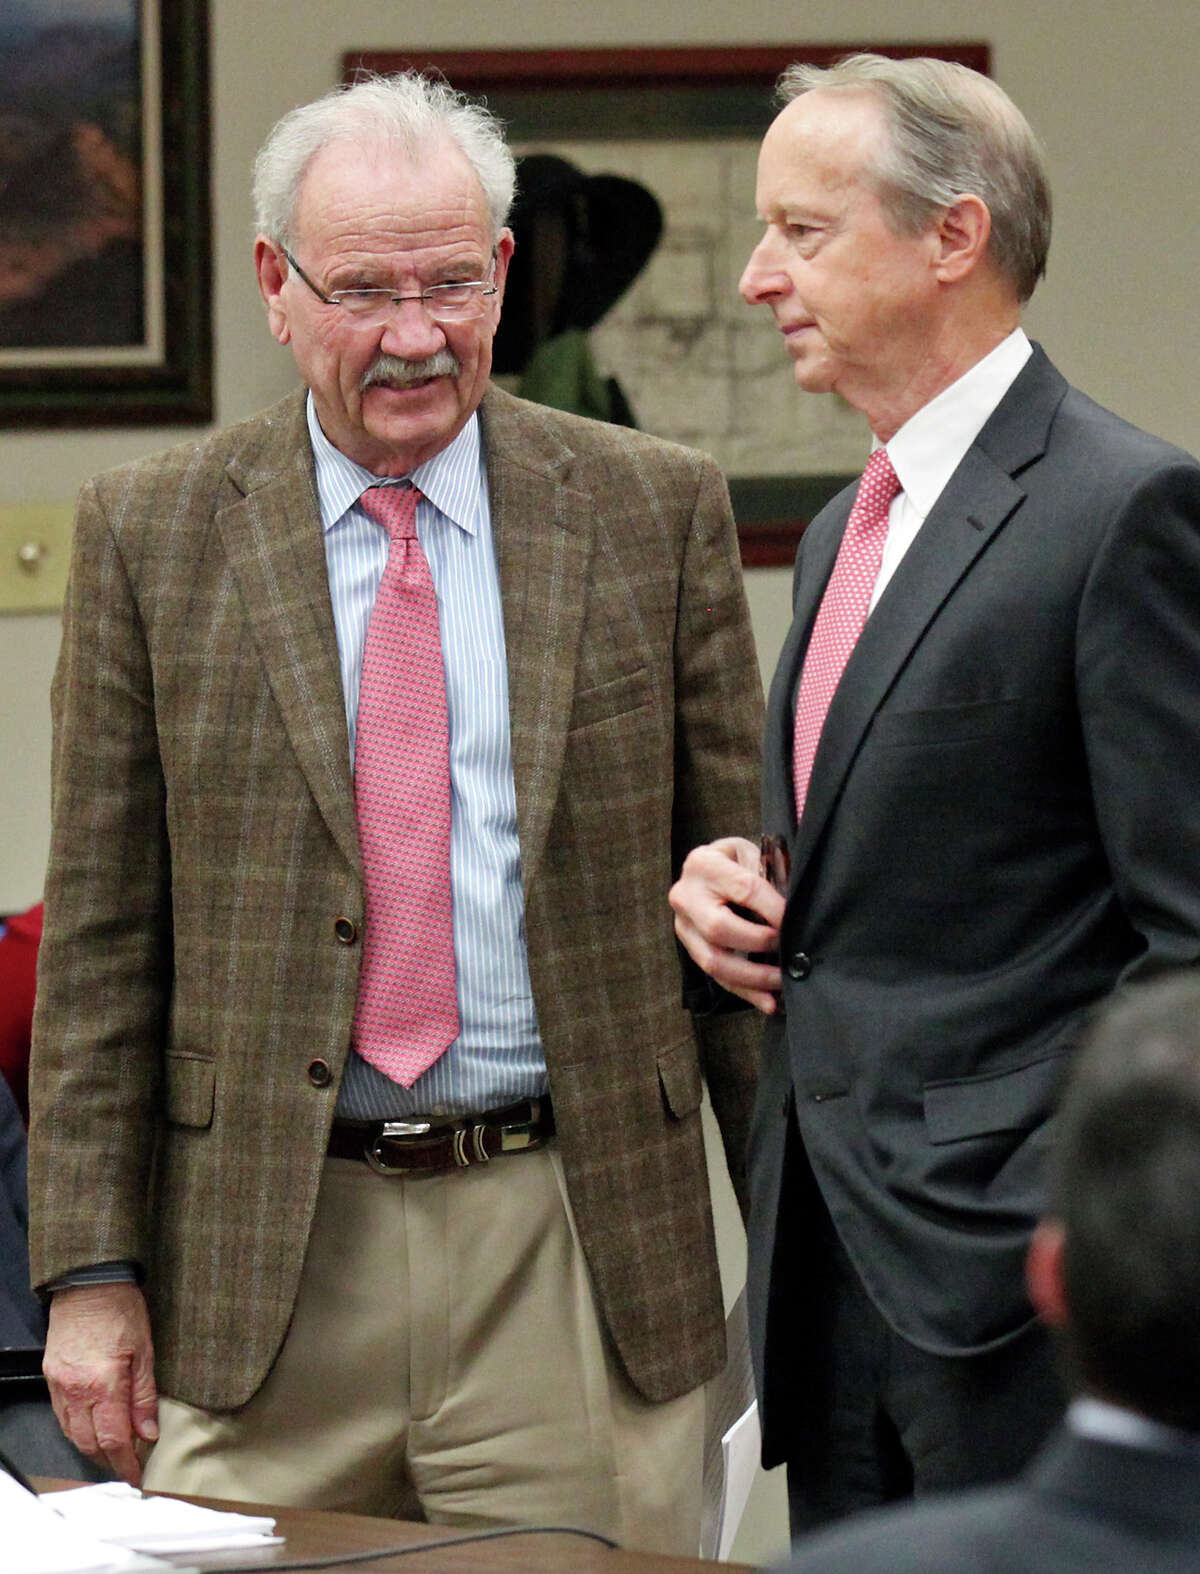 Former Mayor Phil Hardberger (left) talks with Tom Benson's lawyer David Beck Monday Feb. 9, 2015 in Bexar County Probate Court. Bexar County Probate Judge Tom Rickhoff appointed former Mayor Phil Hardberger and estate planning lawyer Art Bayern as co-receivers of Tom Benson's late wife's trust, which owns a 97 percent interest in Lone Star Capital Bank of San Antonio, three car dealerships and a 2,300-acre ranch near Johnson City. 